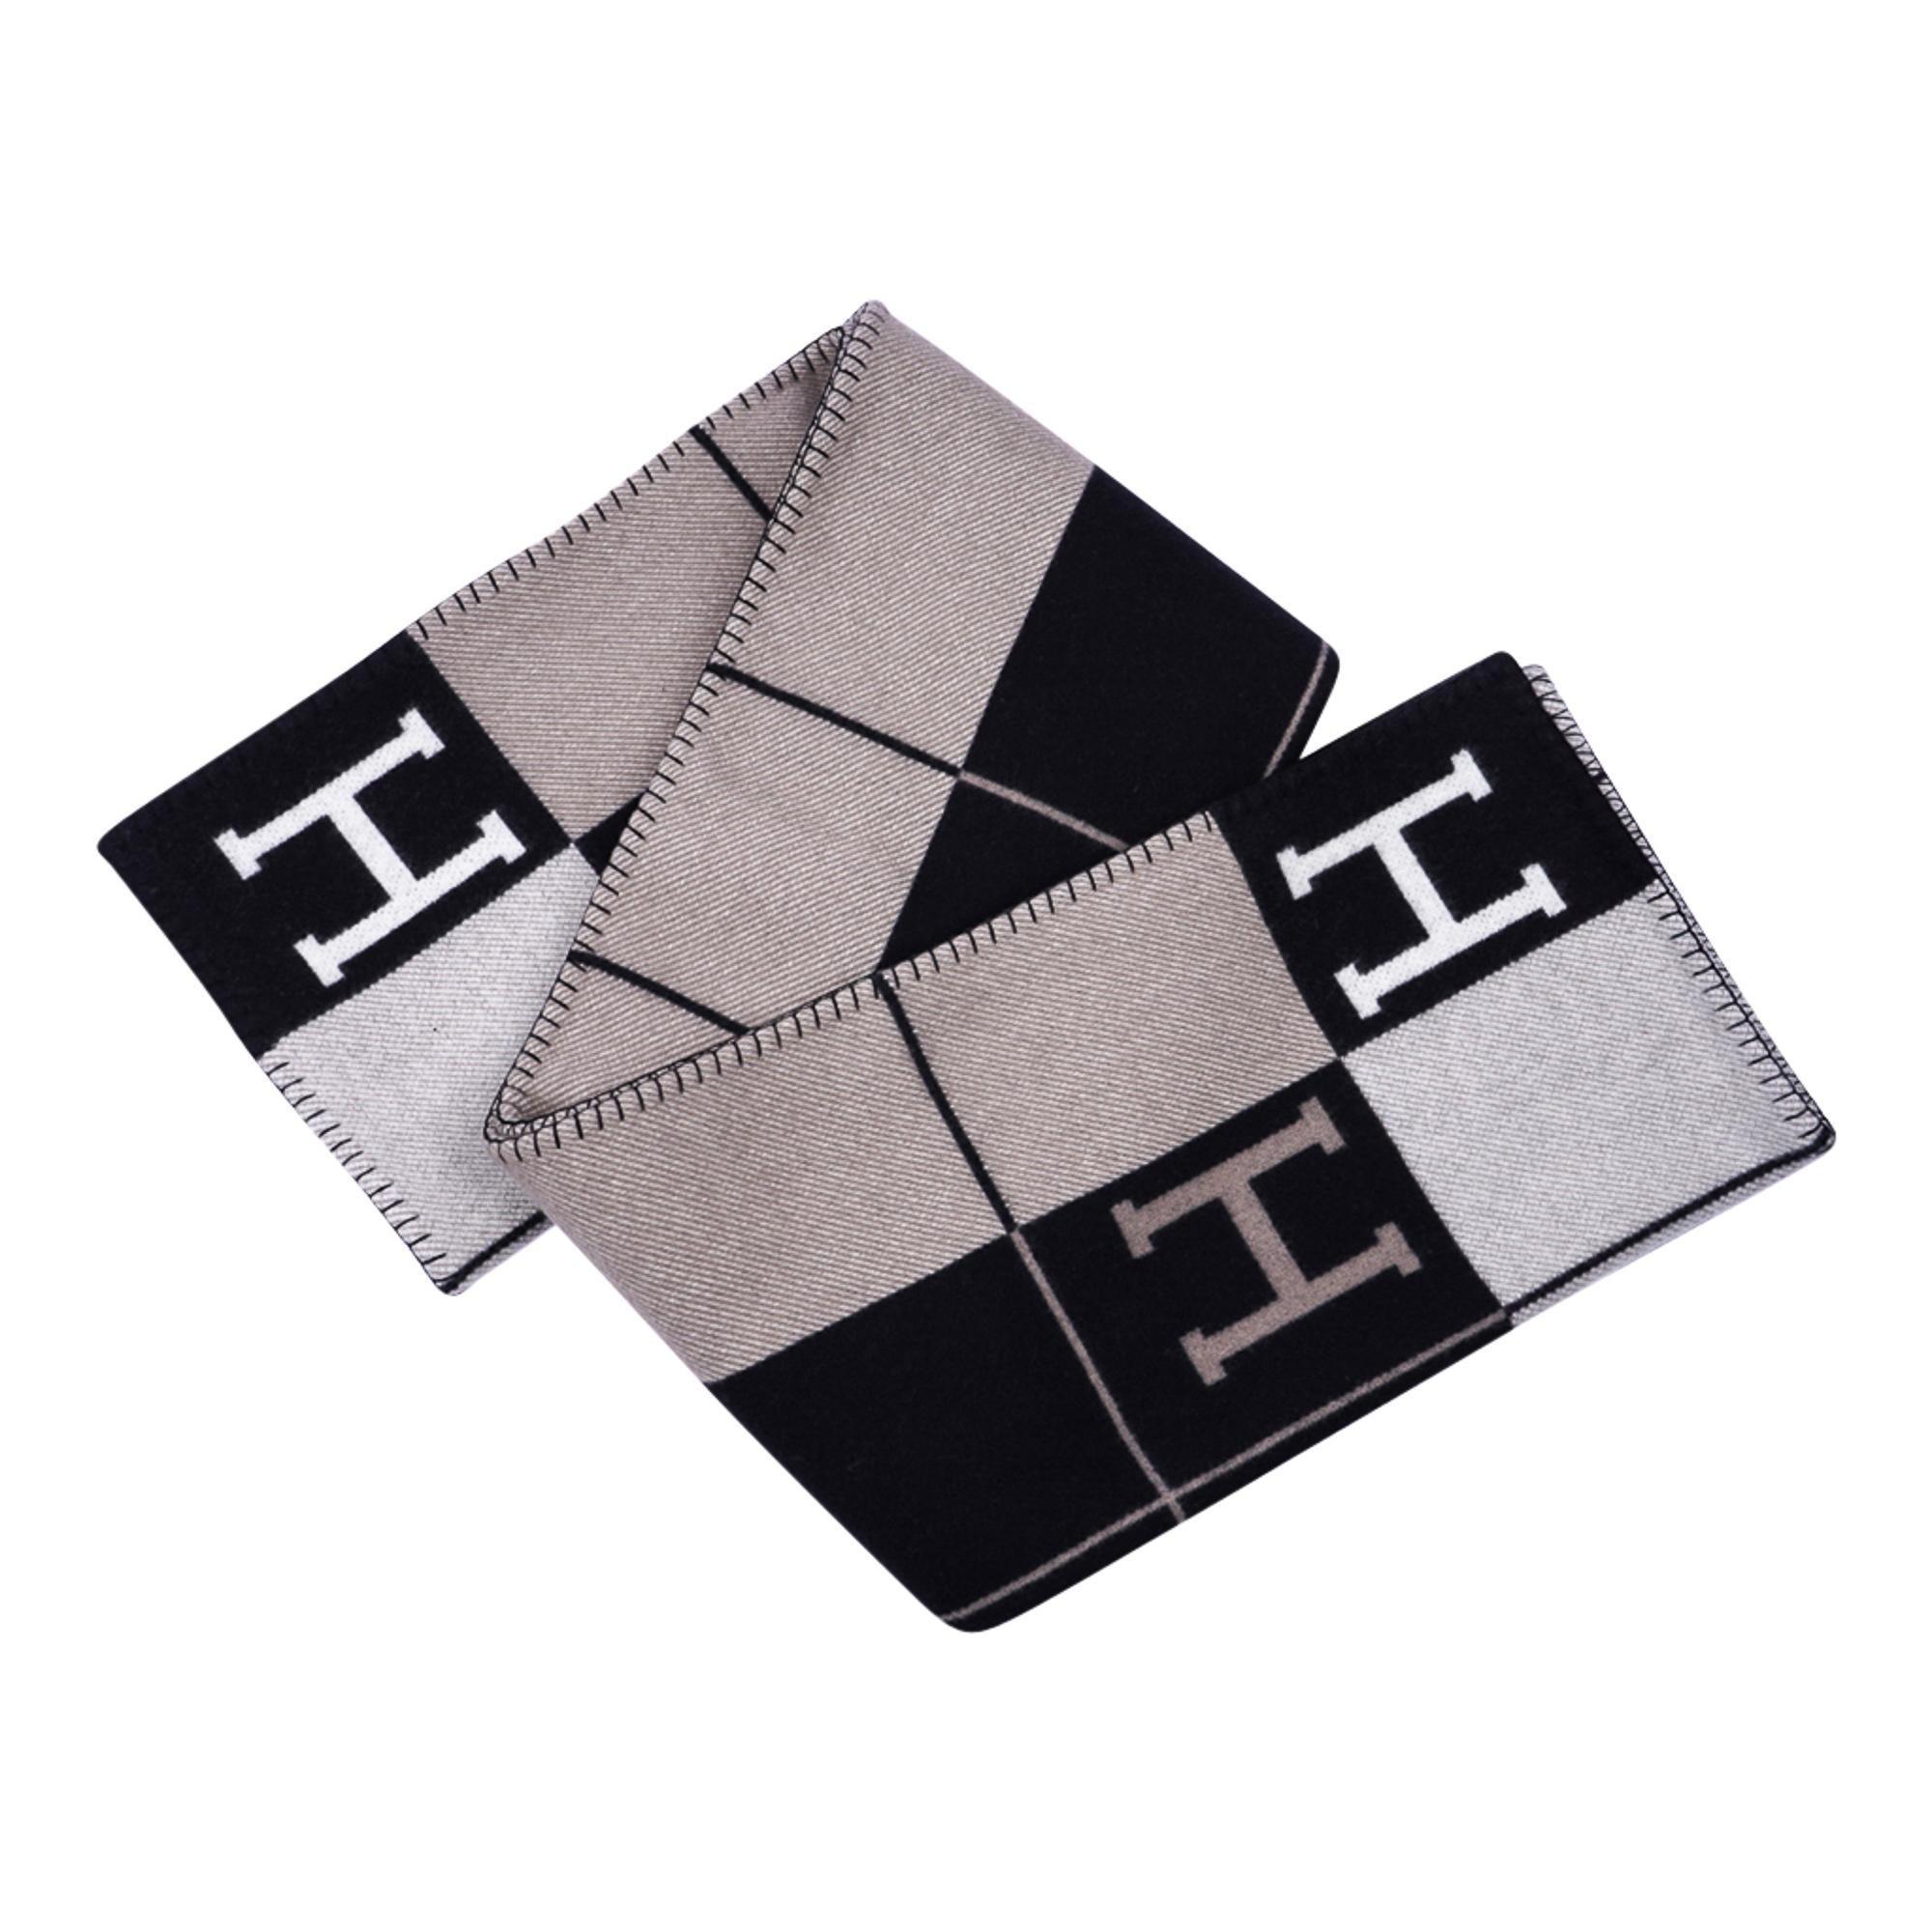 Mightychic offers a guaranteed authentic Hermes classic Avalon III signature H blanket featured in rare Black, Camel and Ecru.
Created from 90% Merino Wool and 10% cashmere and has whip stitch edges.
New or Pristine Store Fresh Condition.